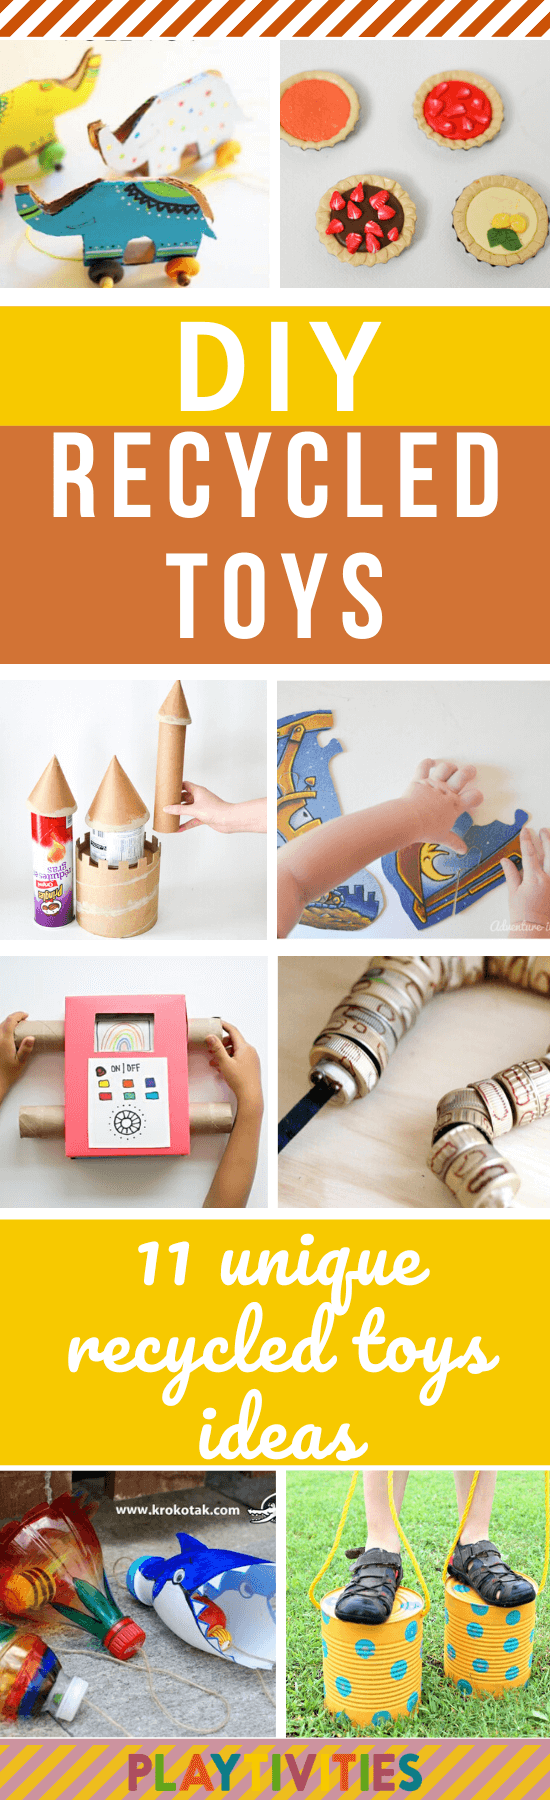 DIY Recycled Toys